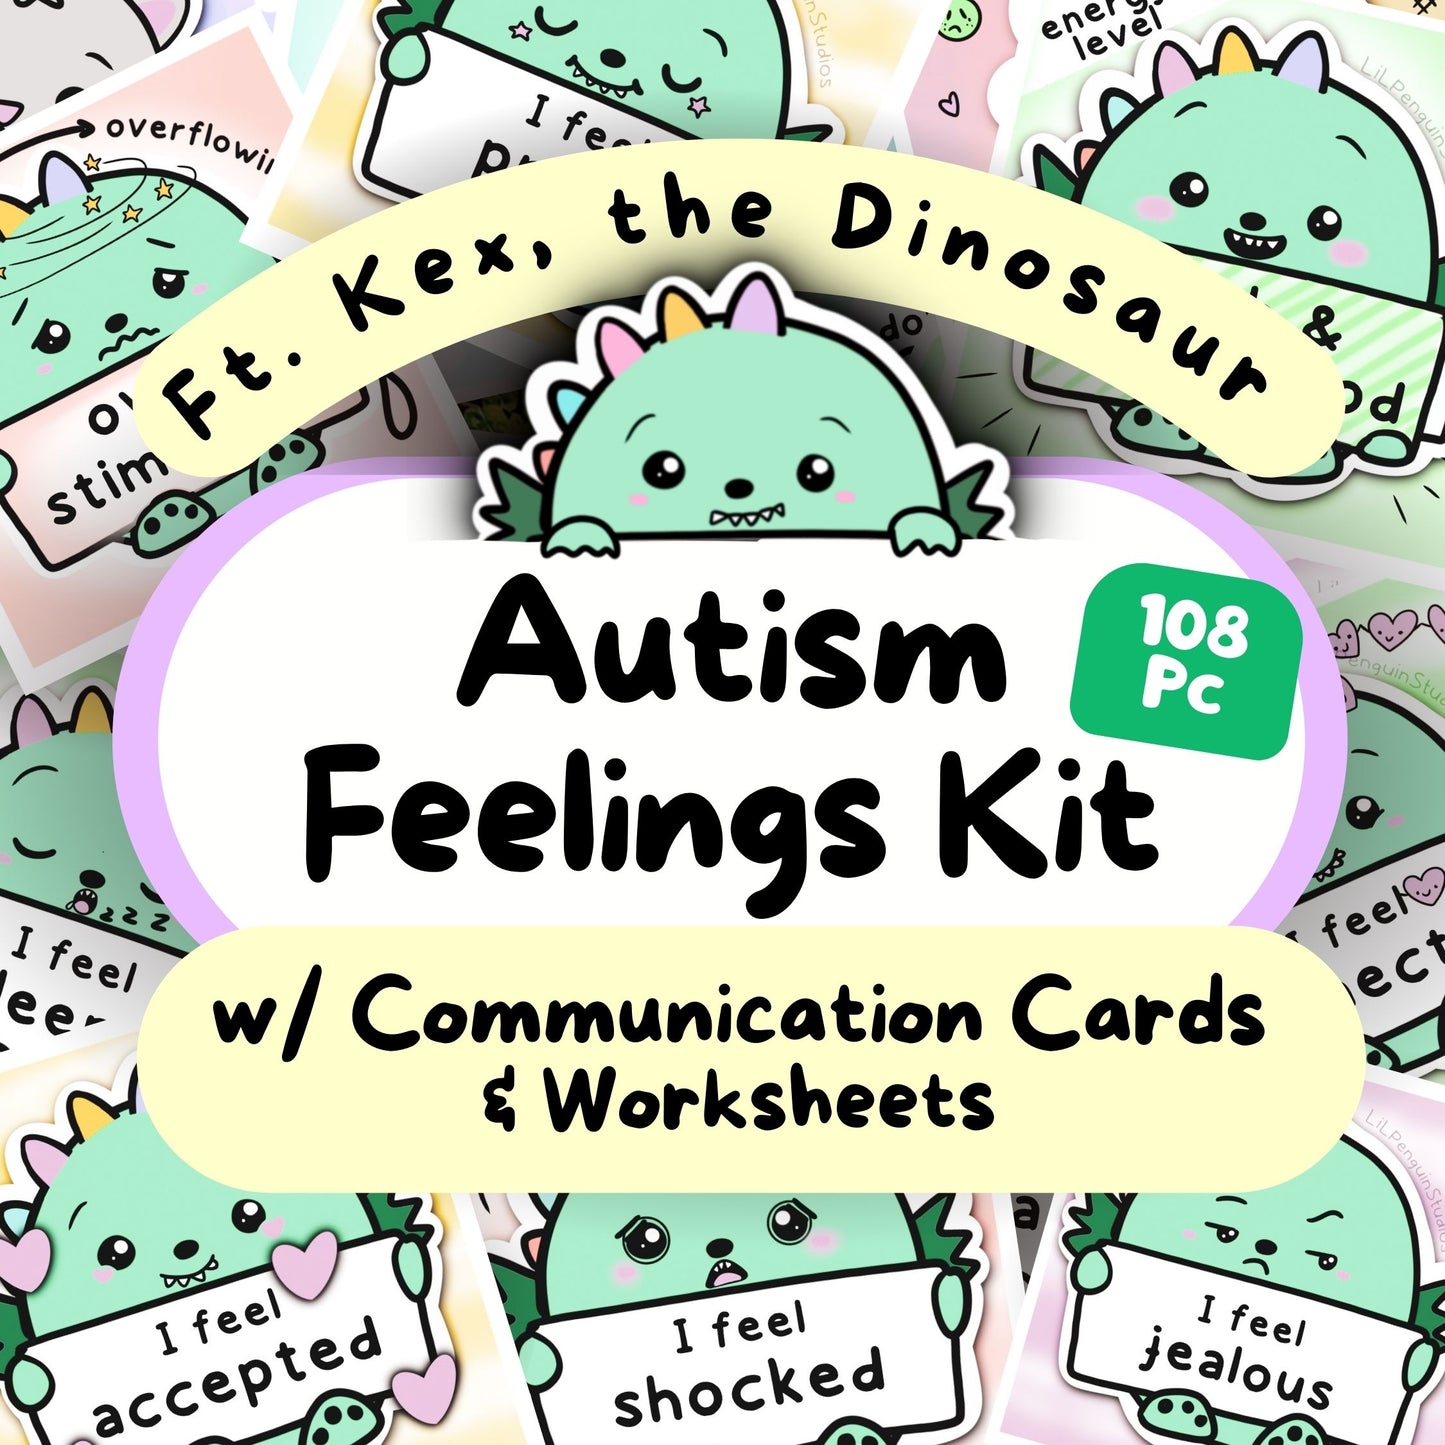 Autism FEELINGS Kit with Communication Cards (Digital) ft. Kex, the Dinosaur - Personal Use